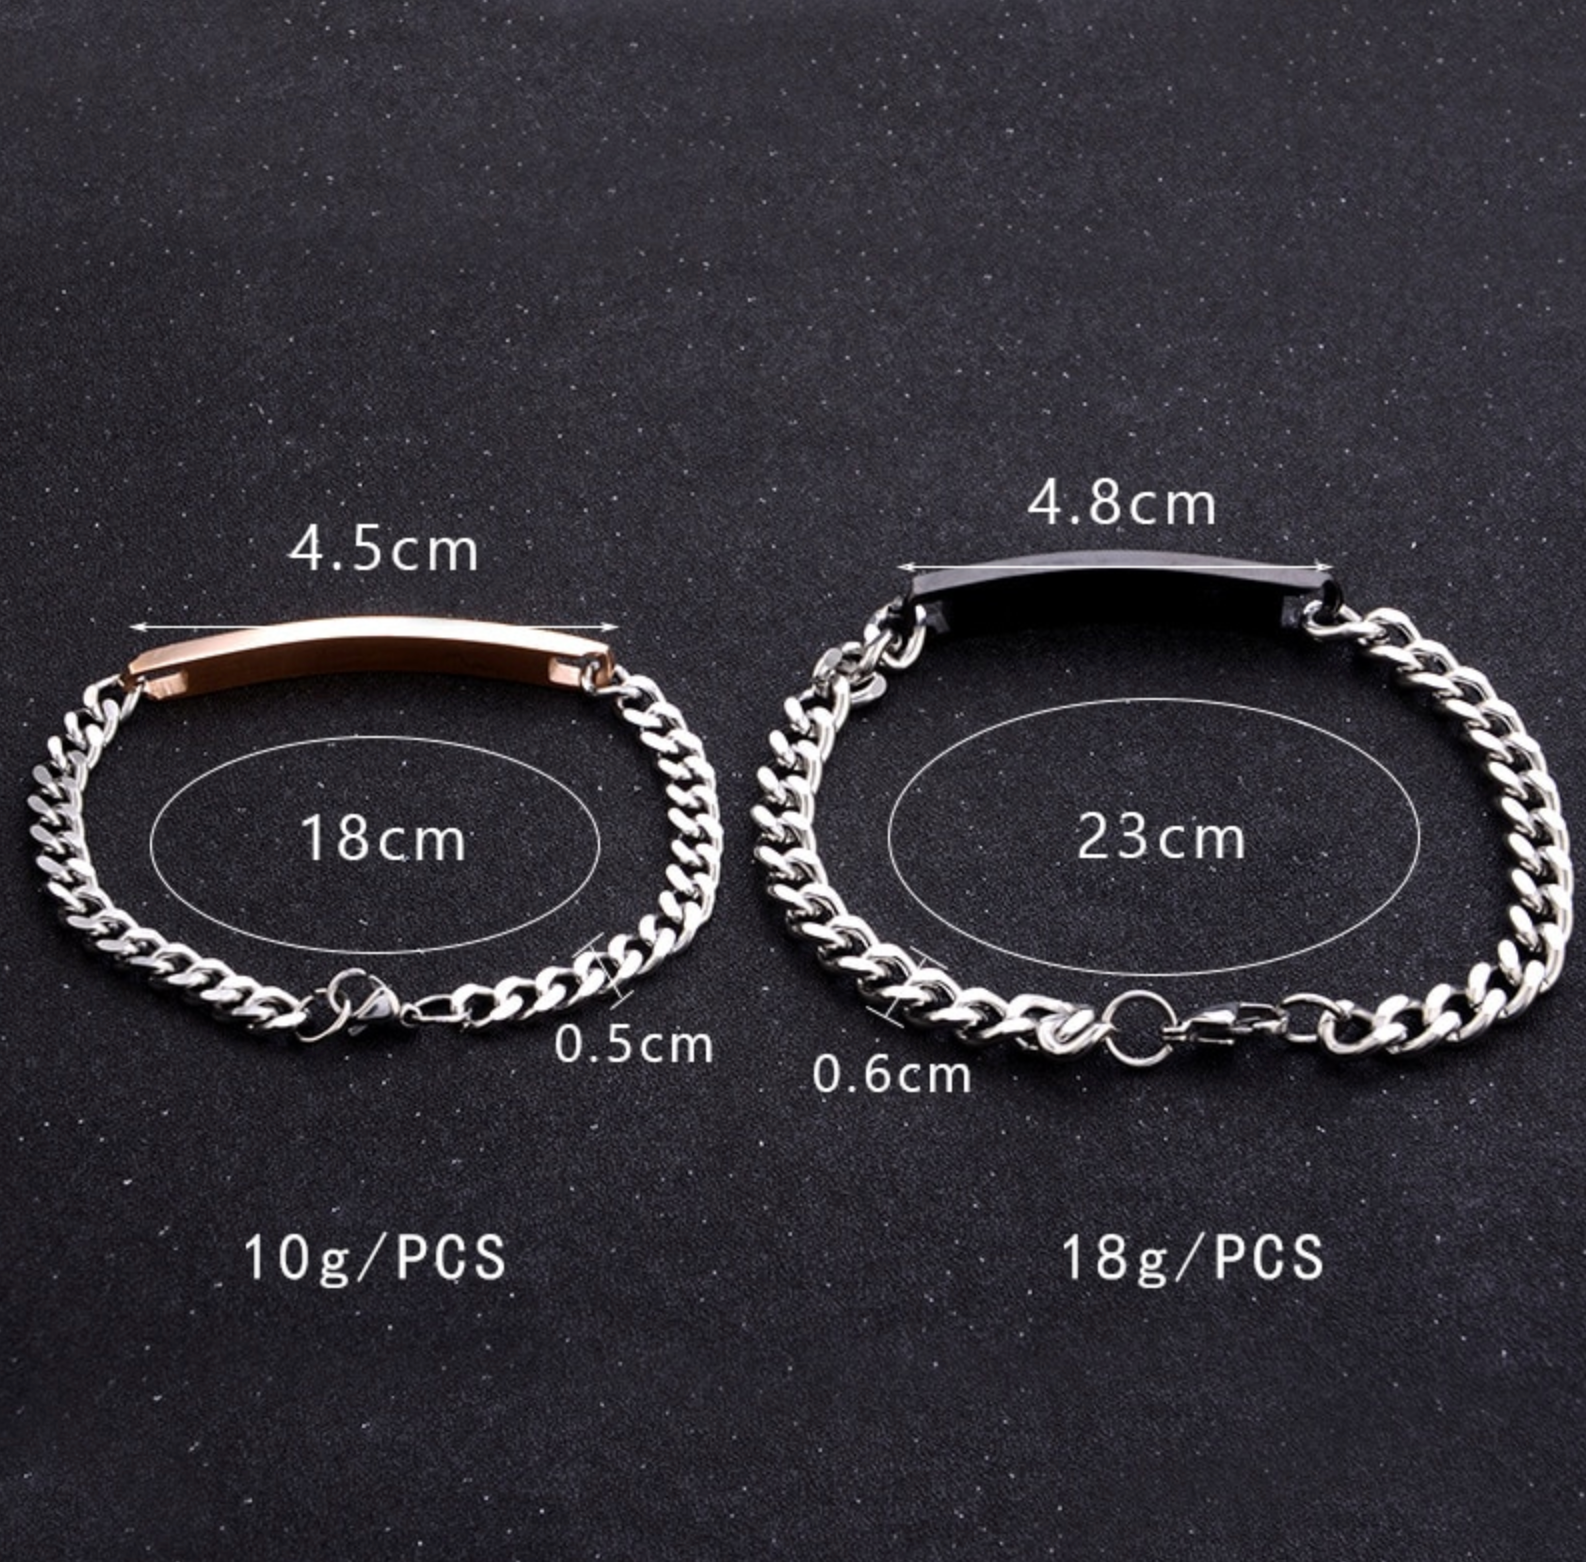 Buy NP His Hers Couples Bracelets Women Men Matching Set Bracelet His Queen  Her King Engraving Cuff Bracelet Birthday Valentines Day Gifts Jewelry for  Boyfriend Girlfriend at Amazonin